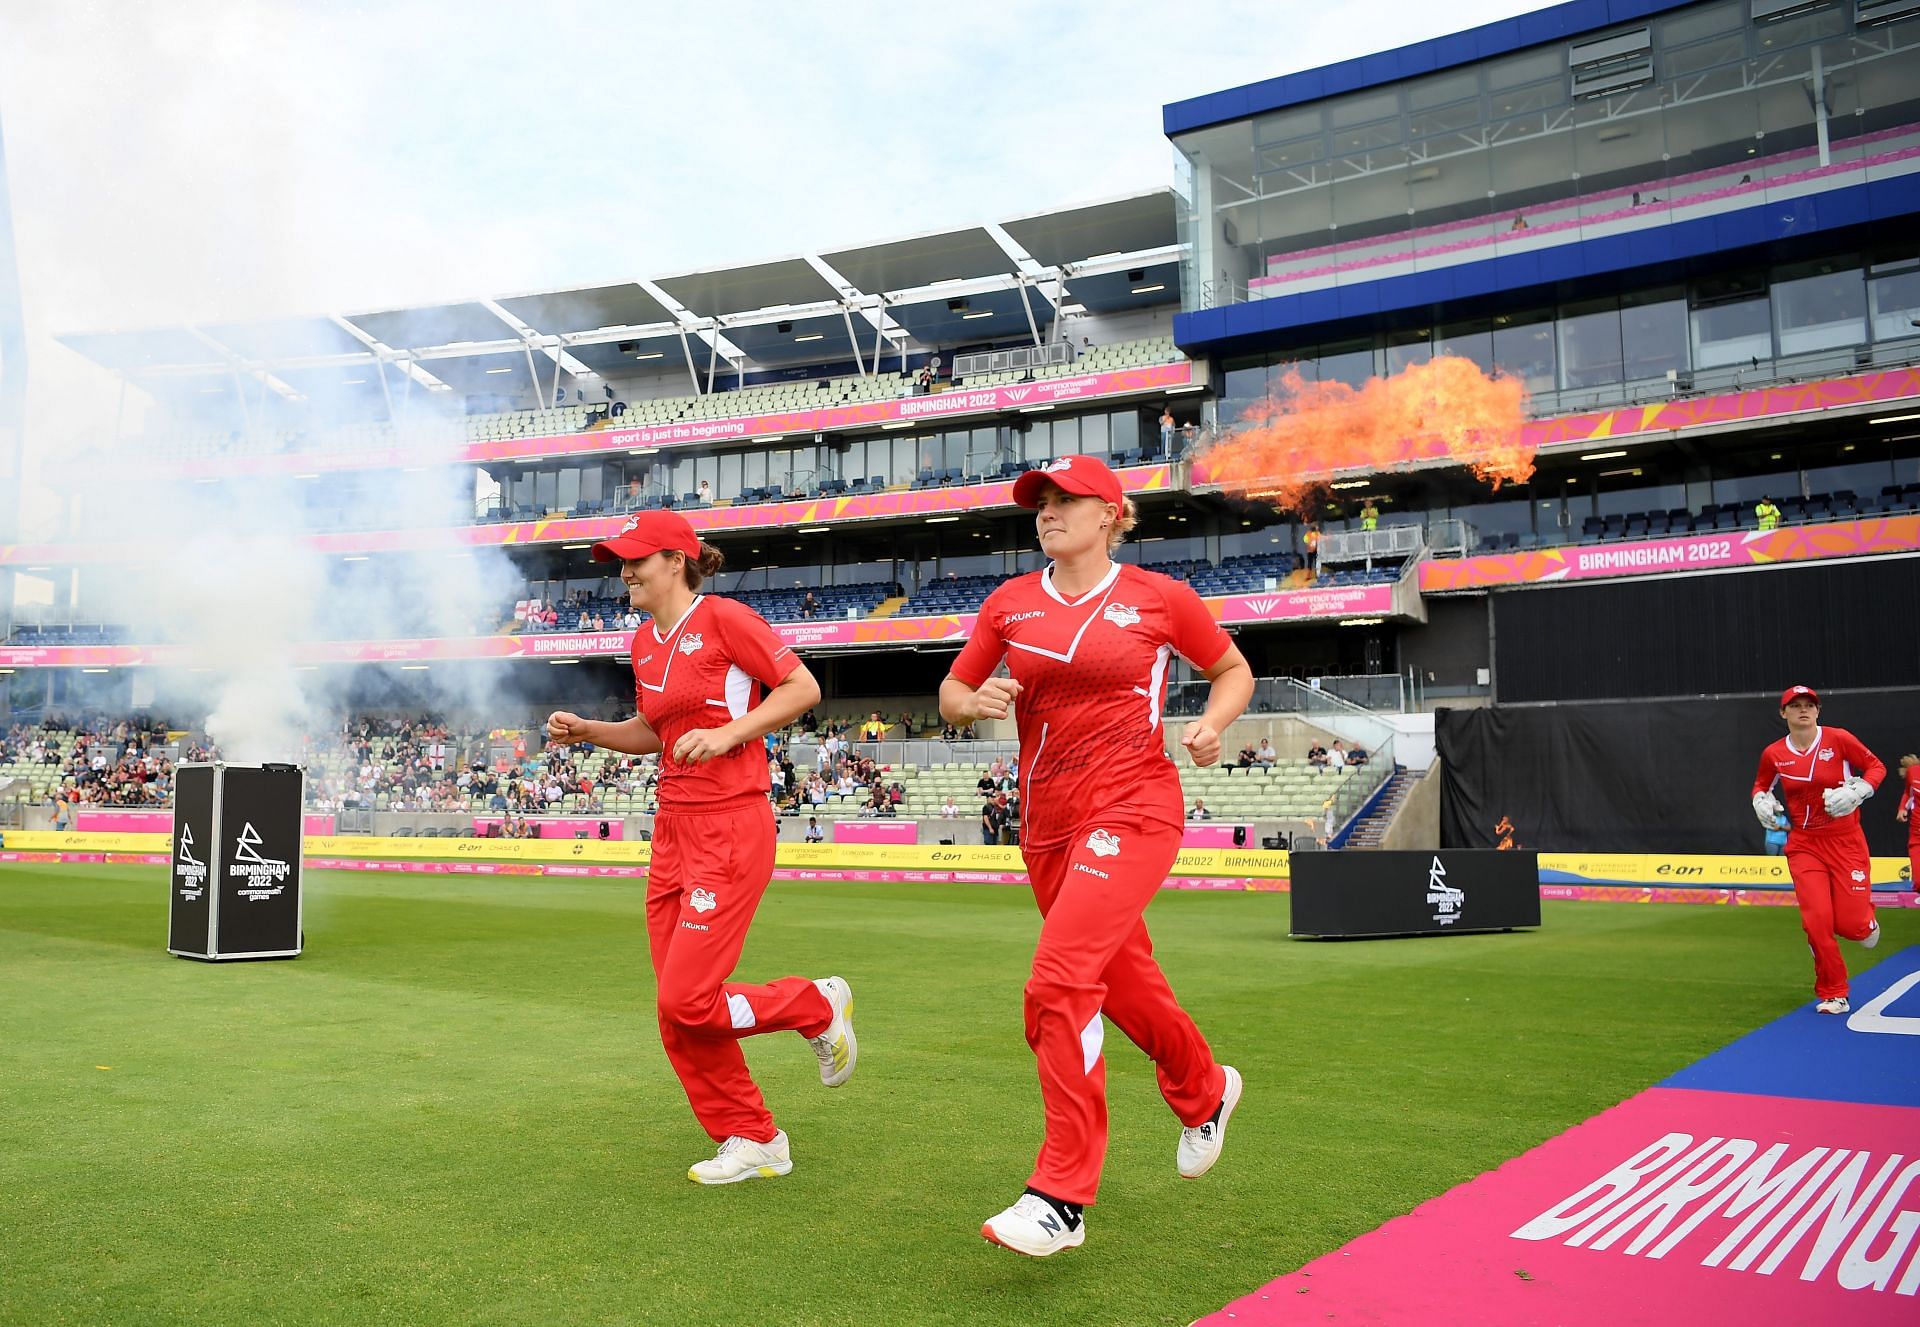 Cricket - Commonwealth Games: Day 2 (Image courtesy: Getty)